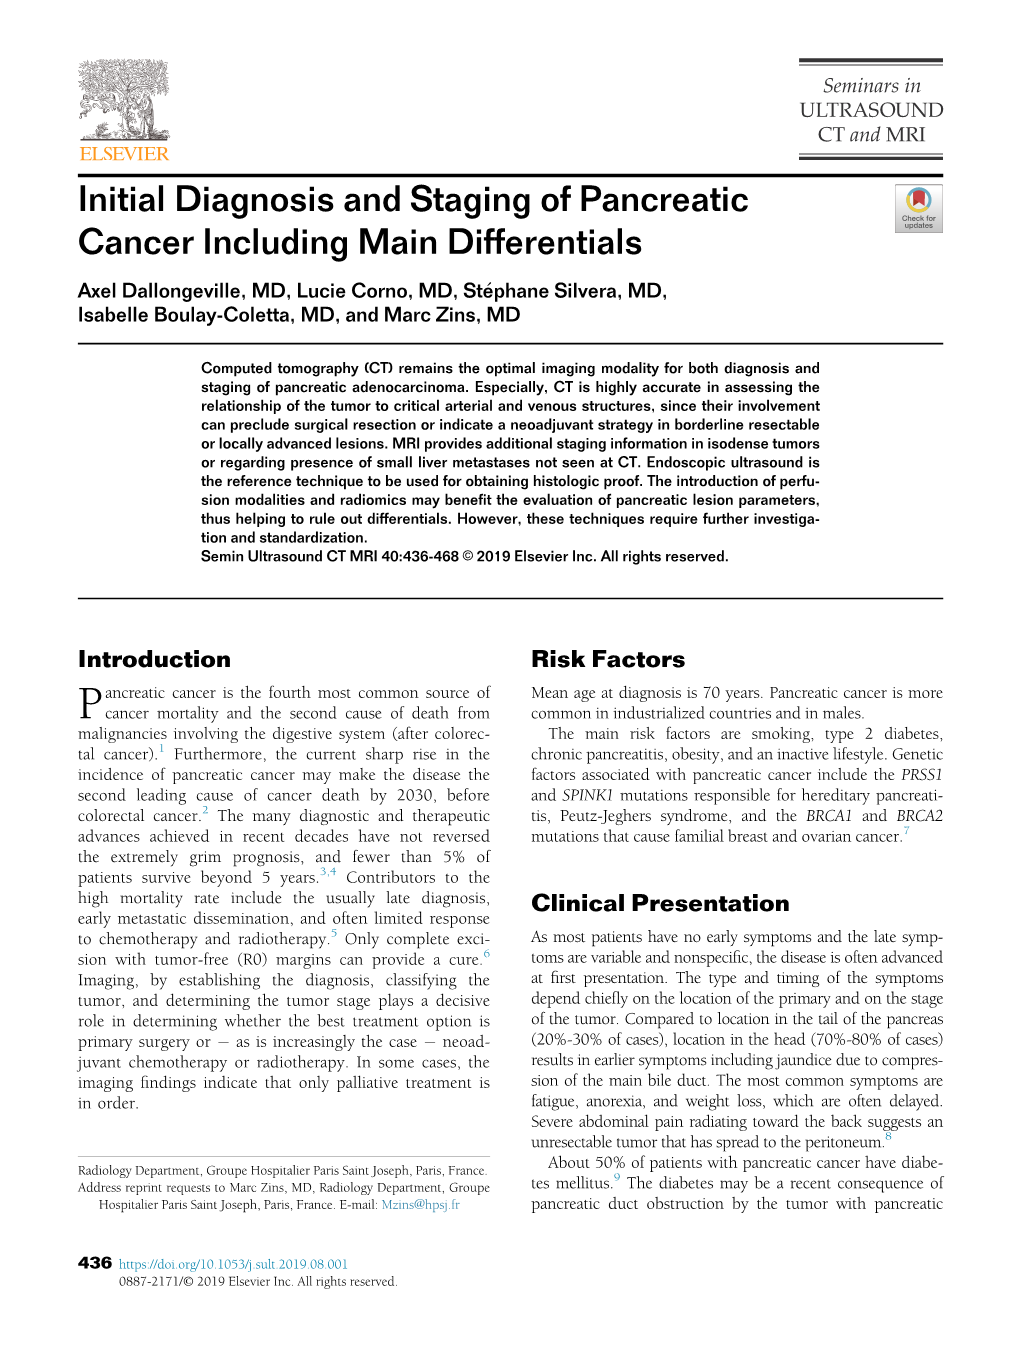 Initial Diagnosis and Staging of Pancreatic Cancer Including Main